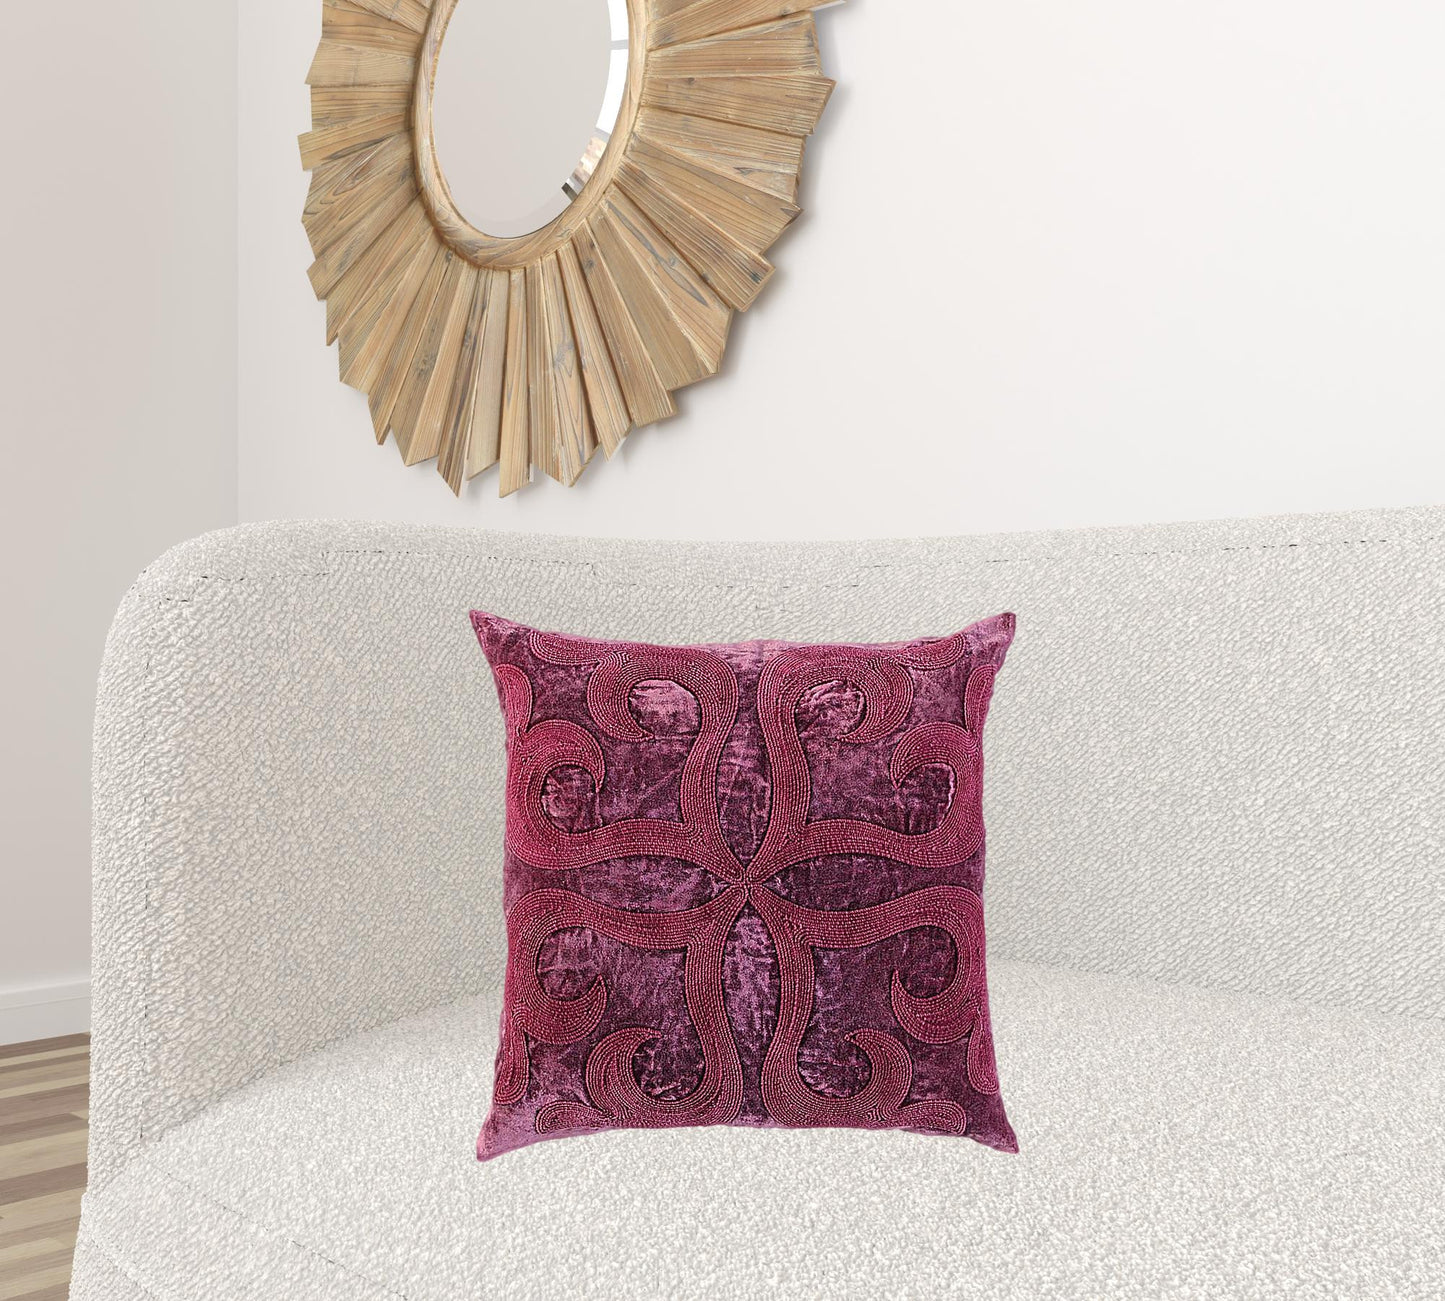 Merlot Dimensional Bloom Embroidered Throw Pillow